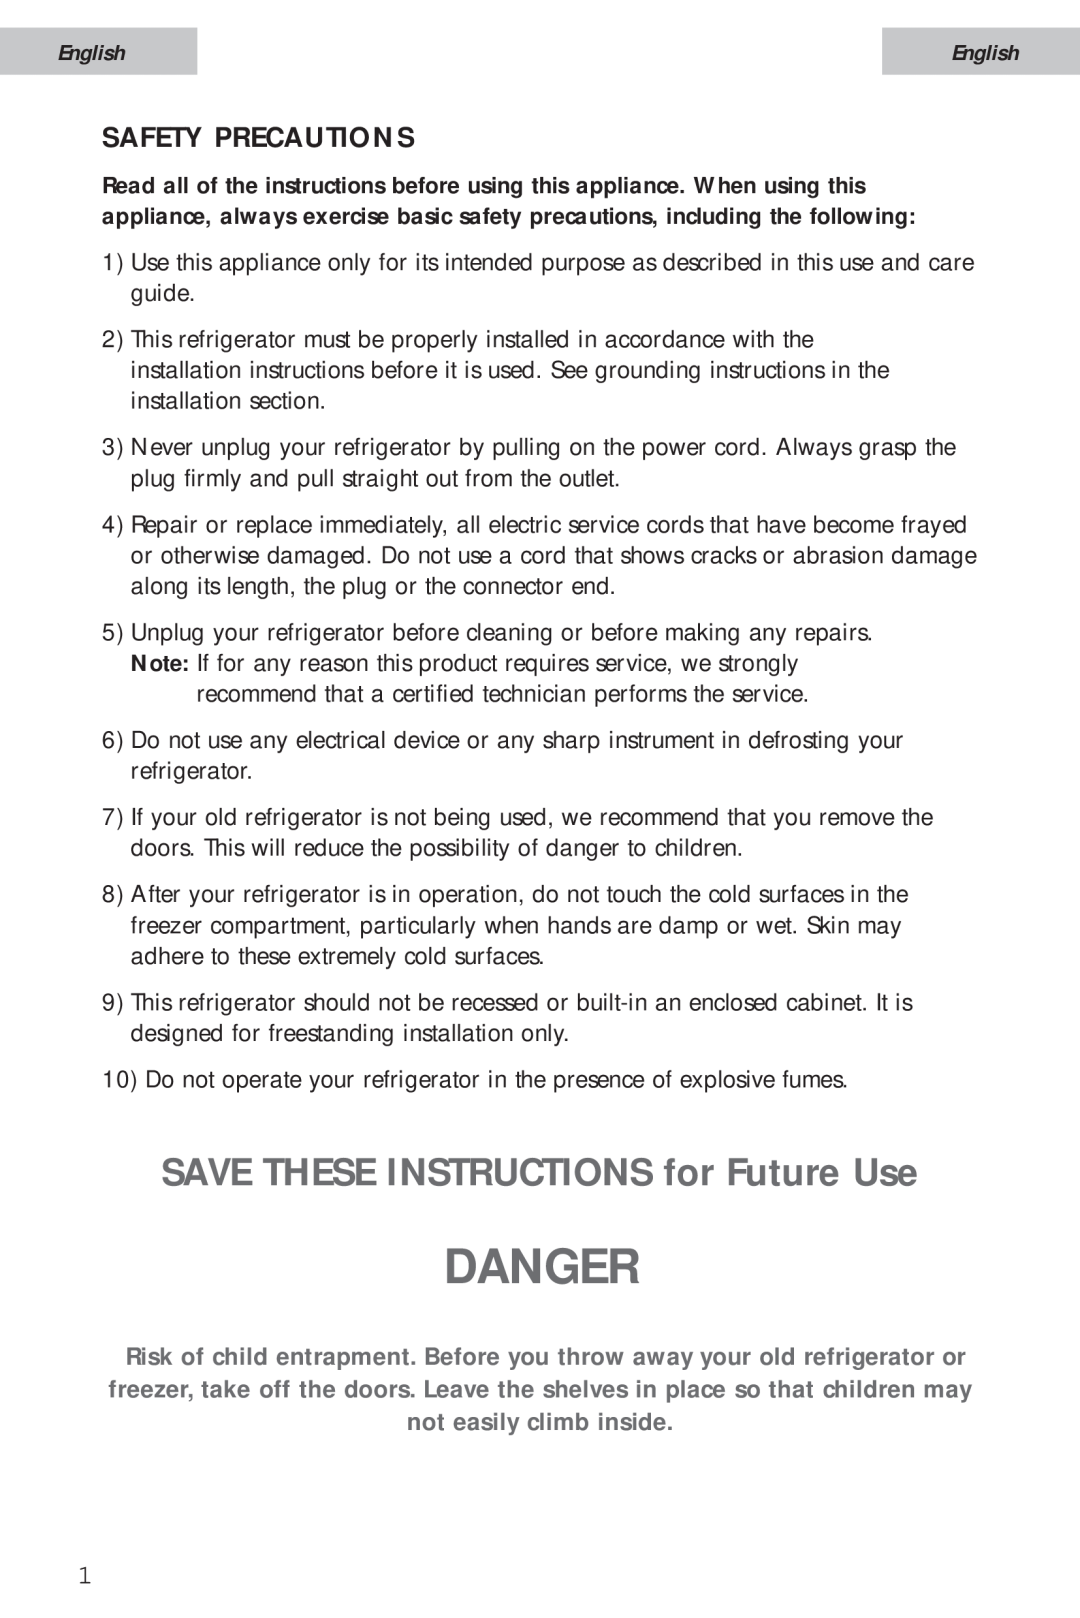 Haier ACM03ARW manual Danger, English, Safety Precautions, SAVE THESE INSTRUCTIONS for Future Use 